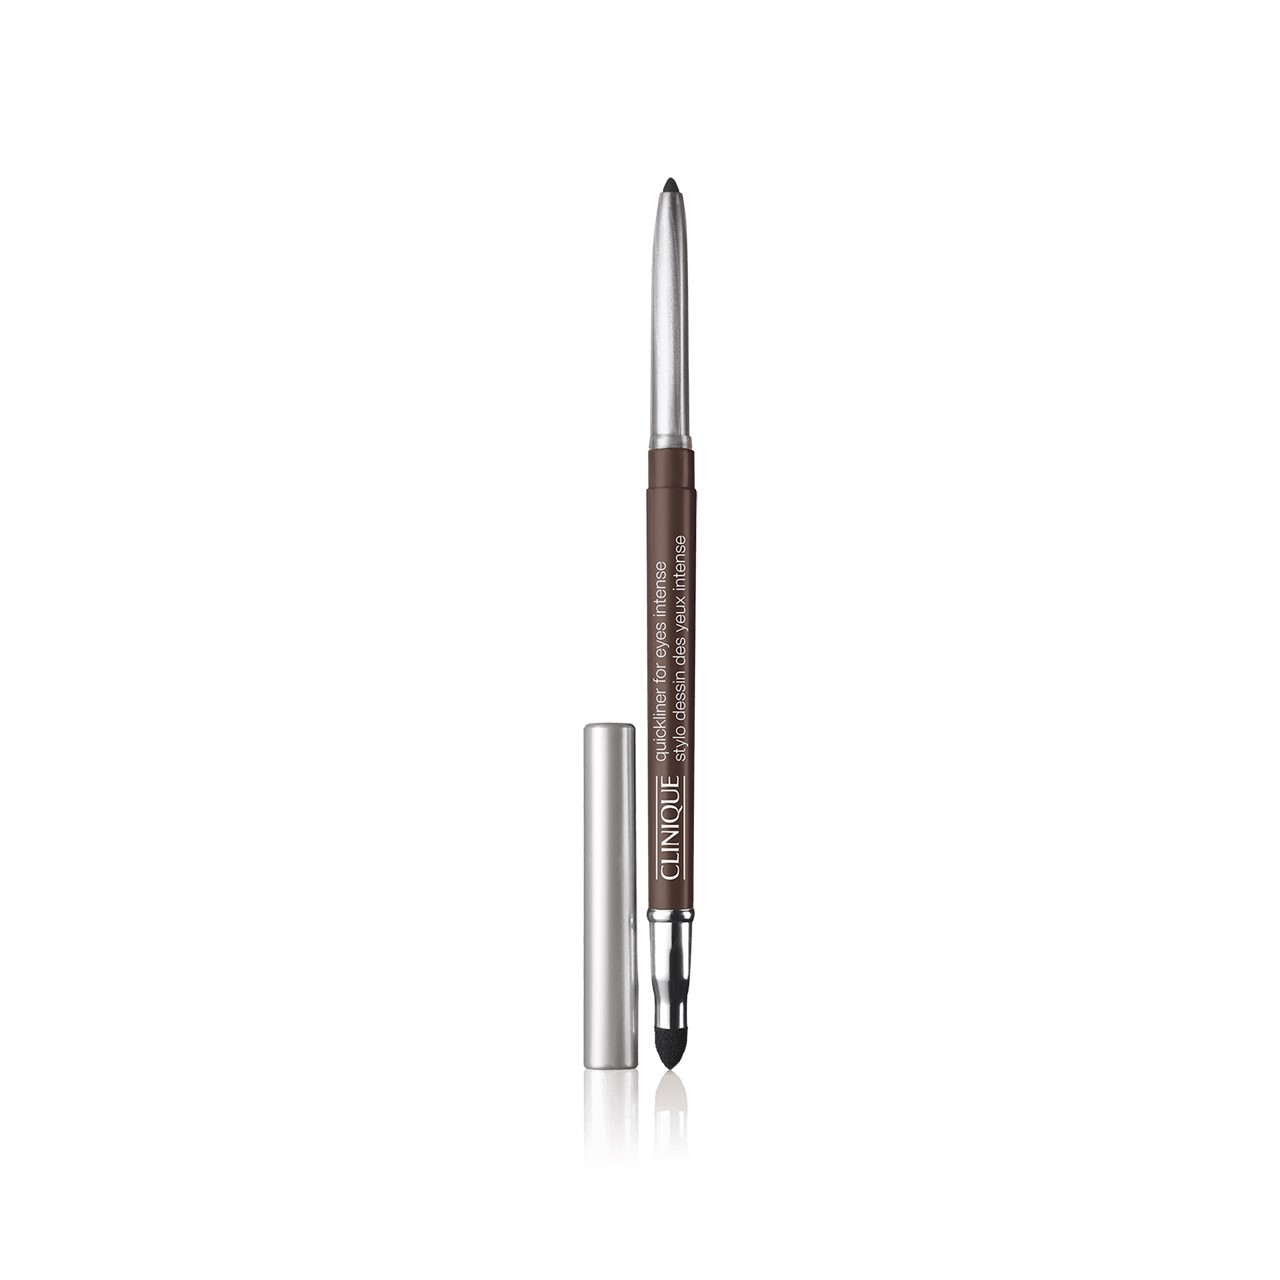 Clinique Quickliner For Eyes Intense Chocolate 0.28g